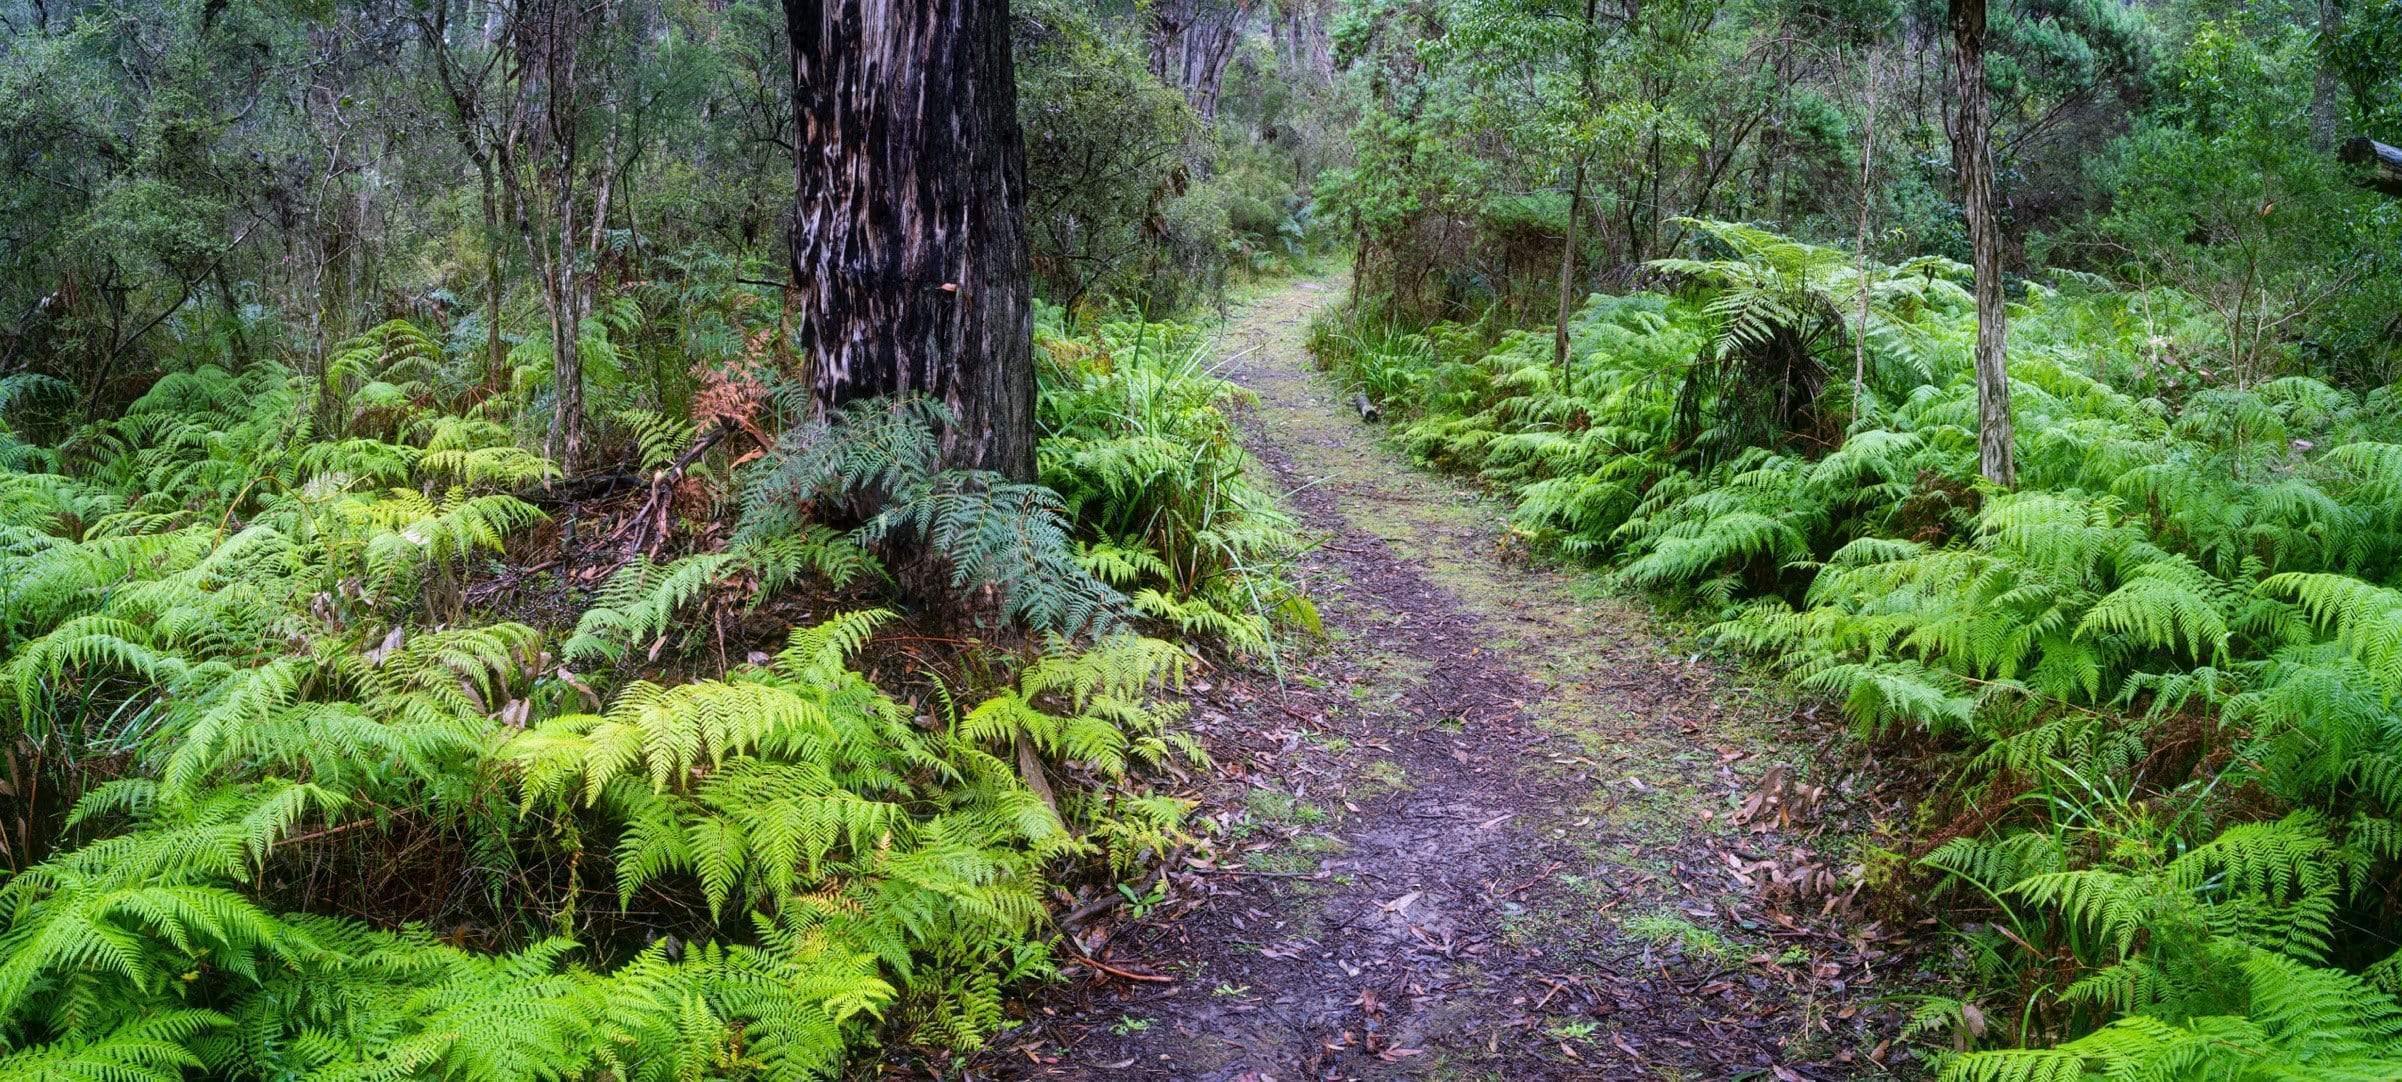 Free pathway between the trees and plants in a forest, Fern Pathway, Main Ridge - Mornington Peninsula VIC